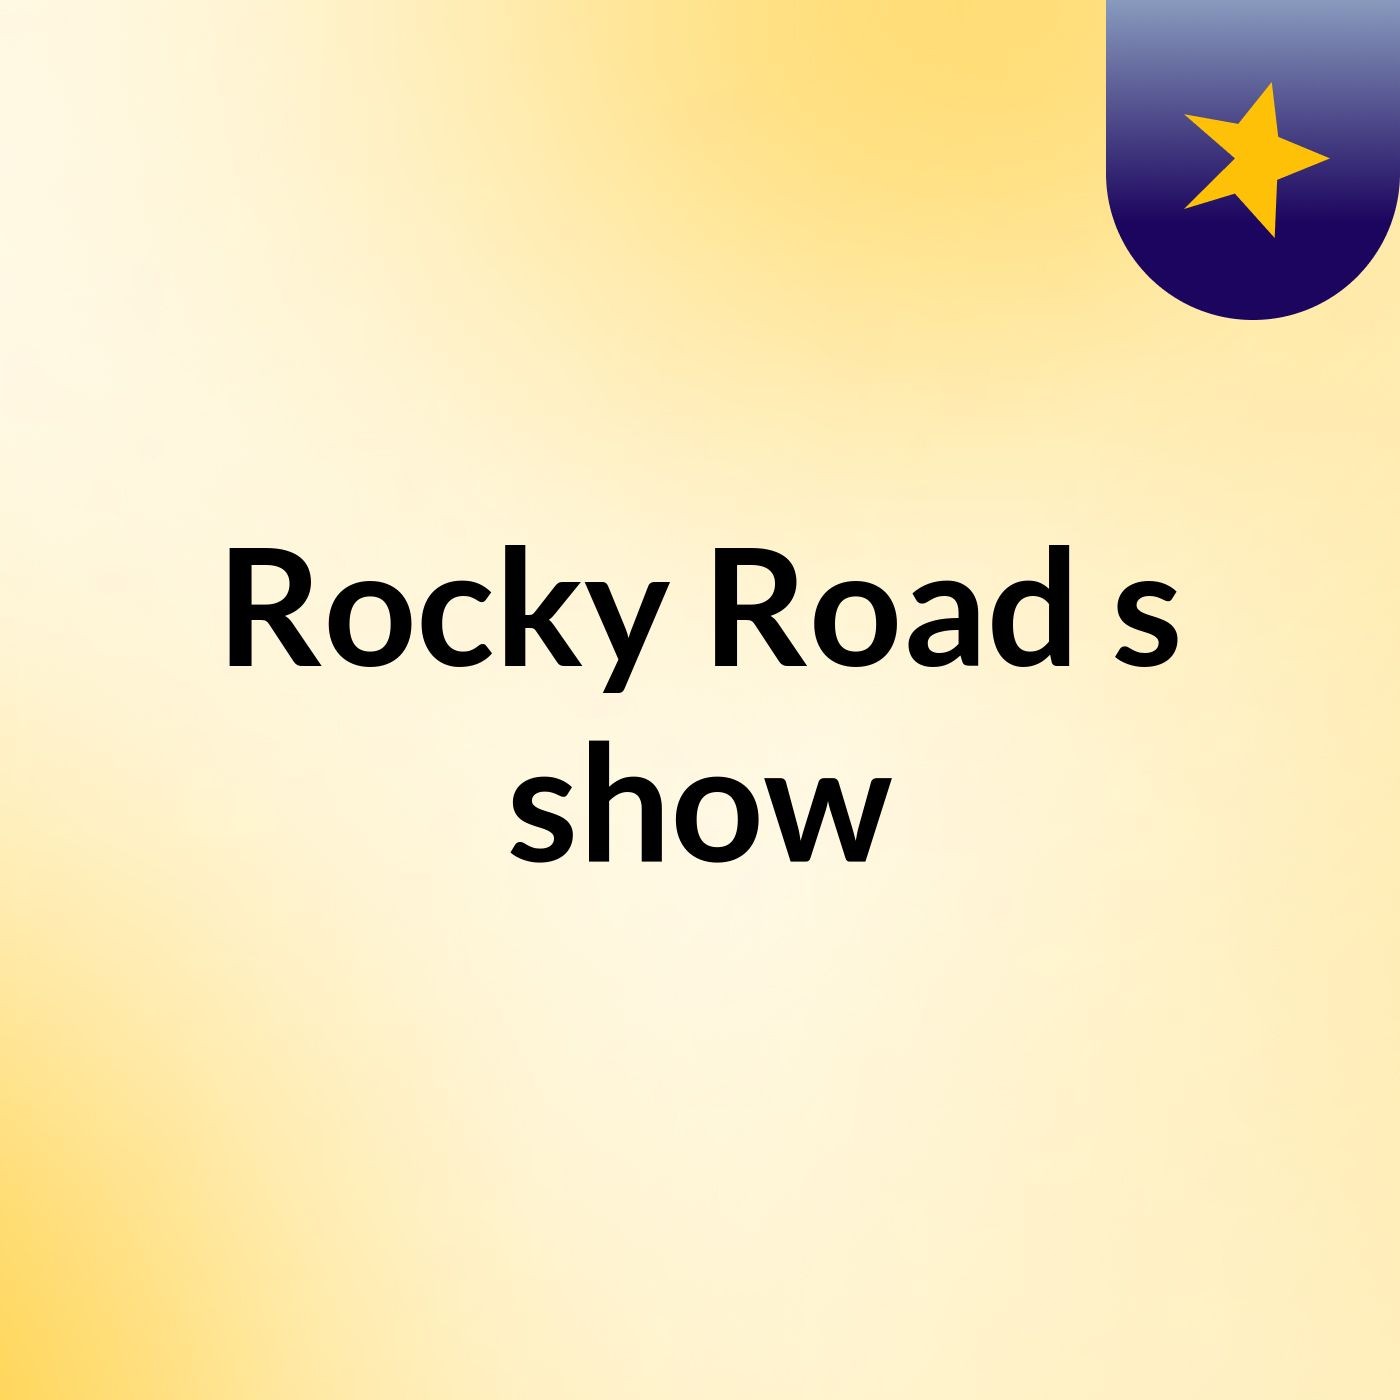 Rocky Road's show